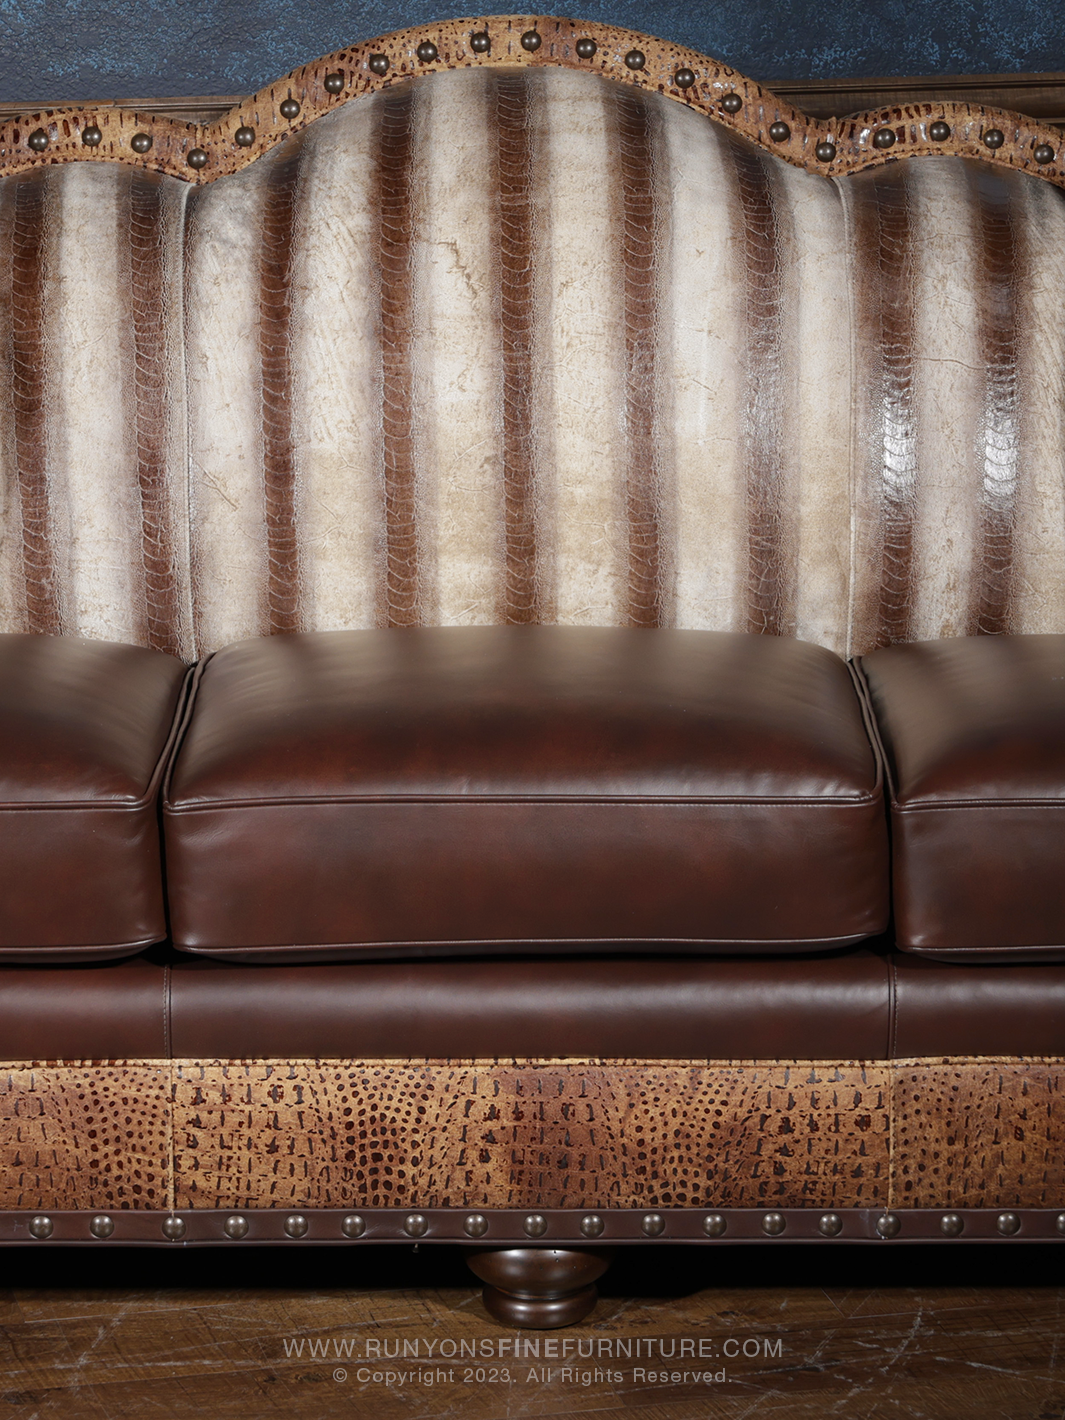 Western Harness Brown Leather Sofa